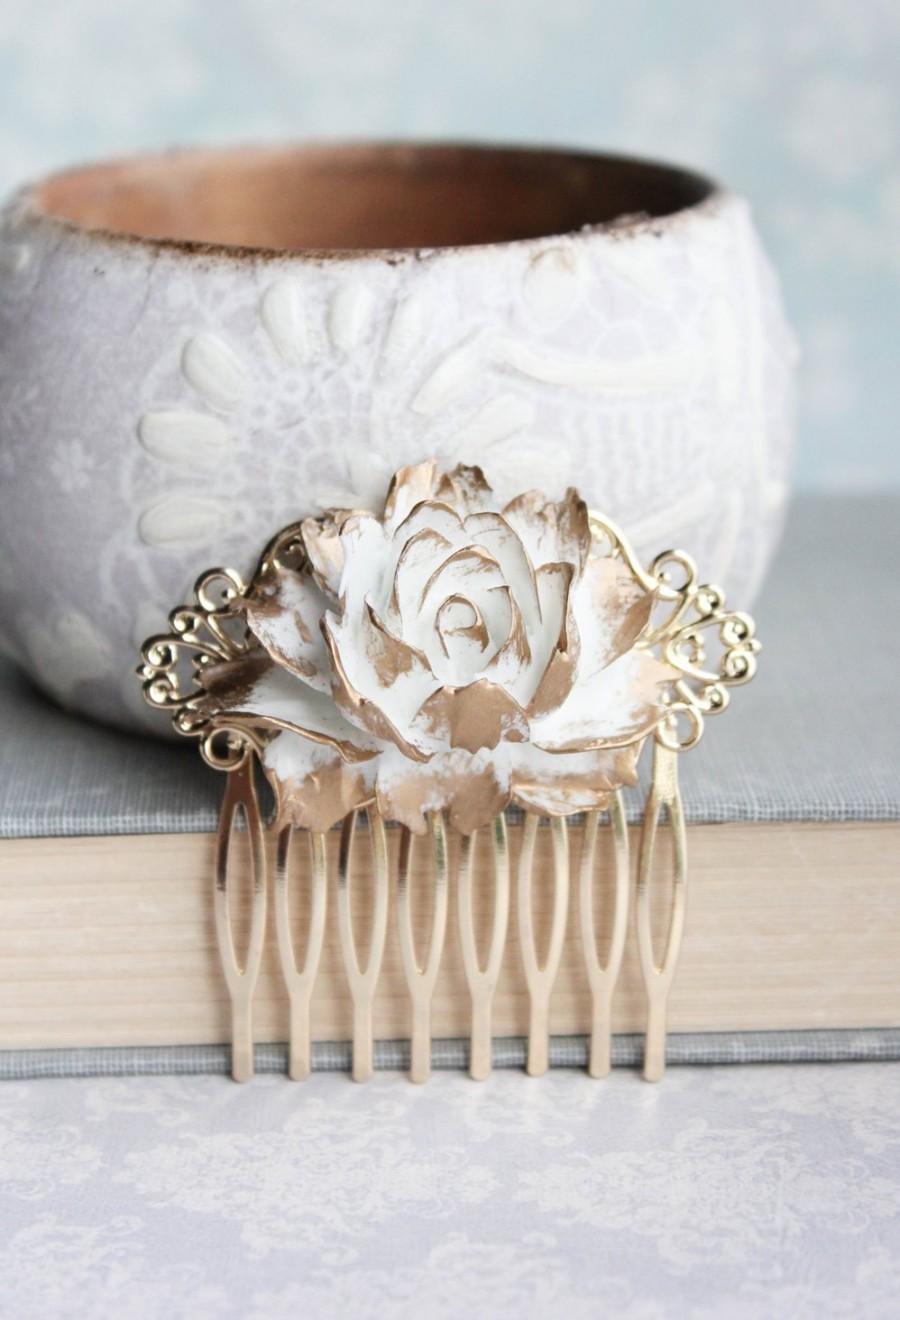 Wedding - White and Gold Rose Comb Big Flower Hair Comb Wedding Hair Accessories Modern Romantic Glam Bridal Hair Piece Cabbage Rose Gold Filigree